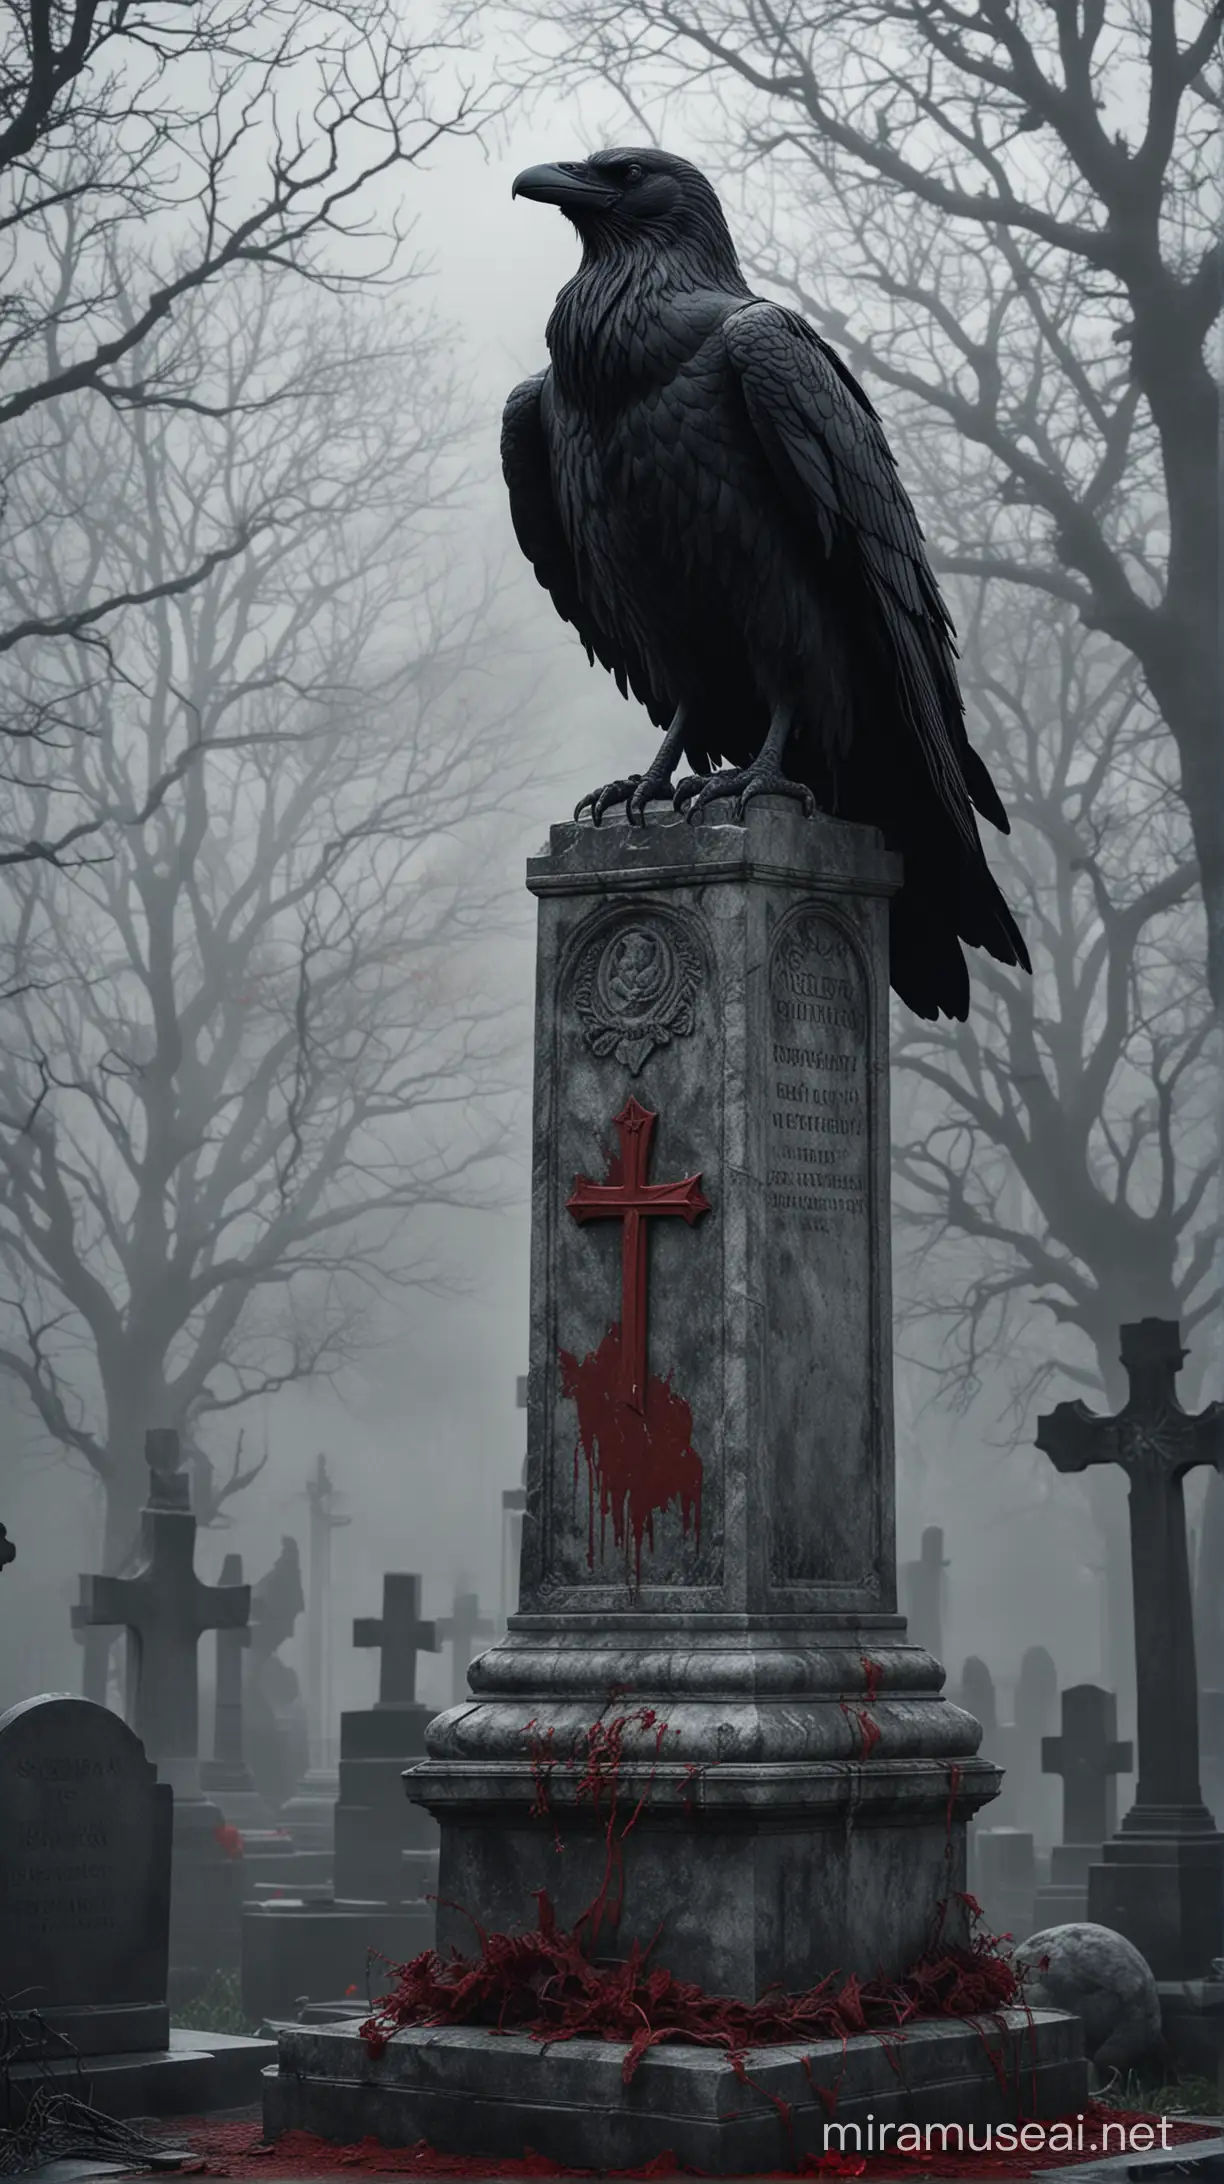 Eerie Cemetery Scene with Raven and Marble Statue